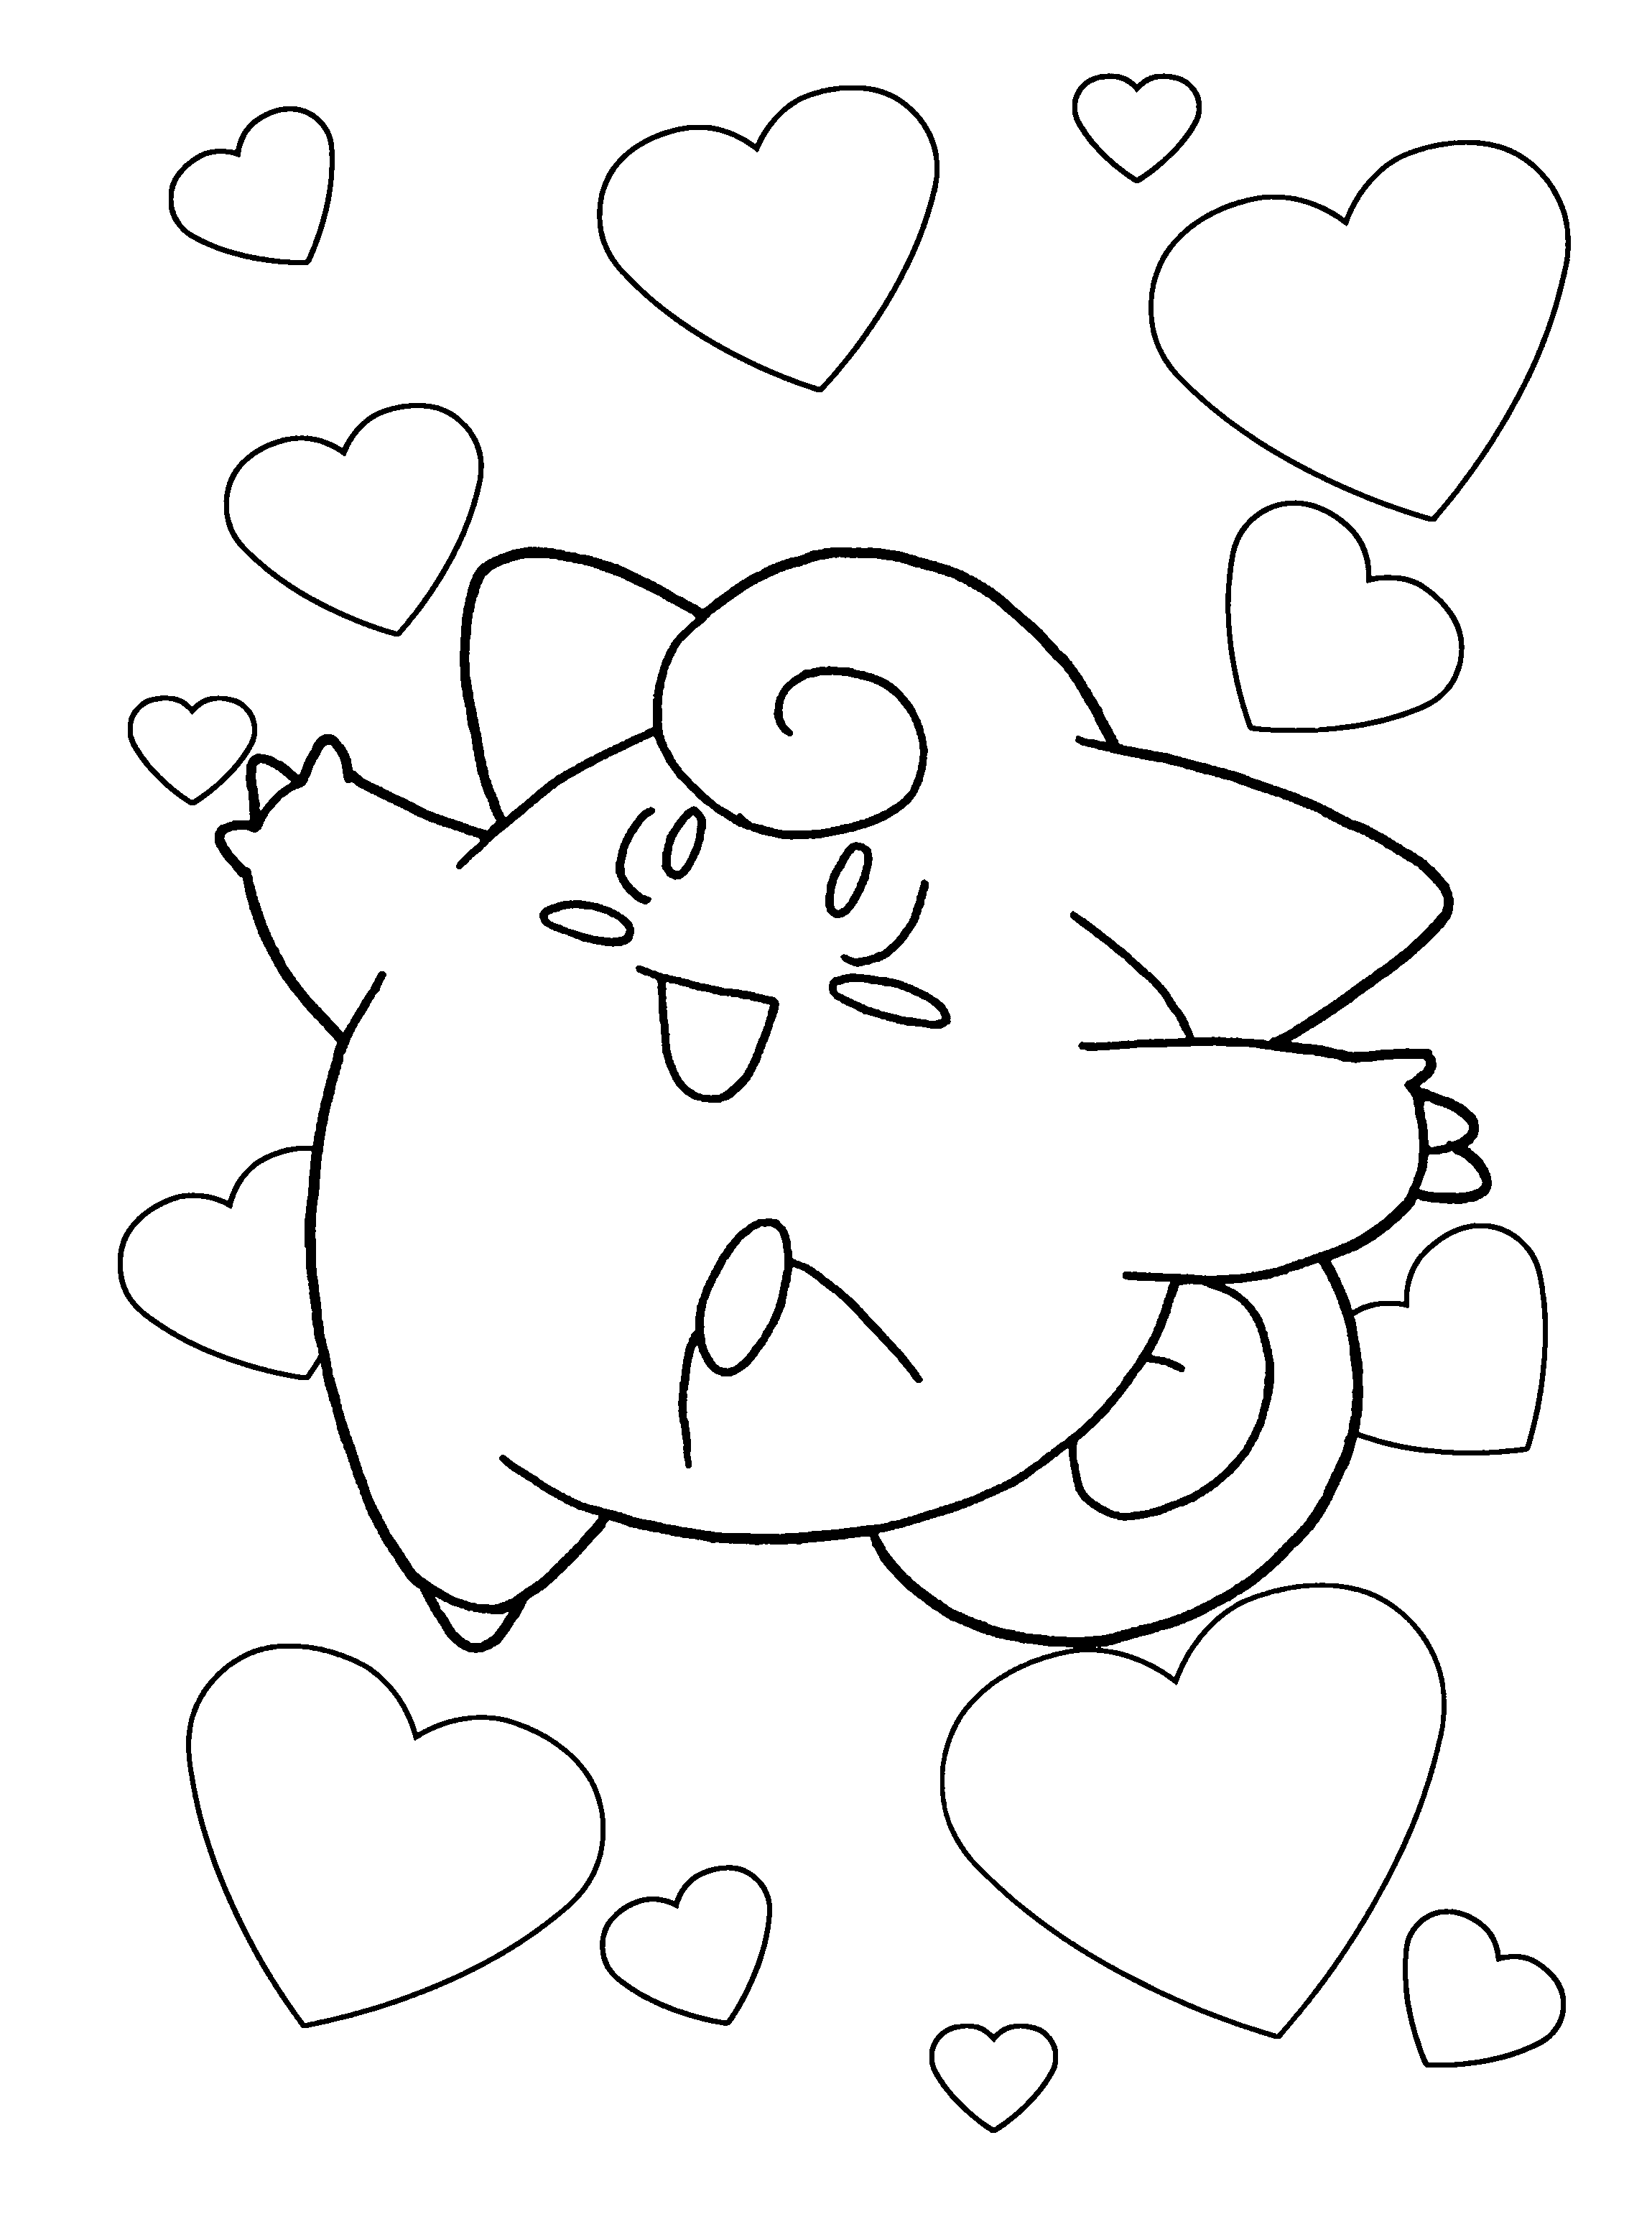 pokemon colouring pages online free pokemon coloring pages download pokemon images and print pages colouring online free pokemon 